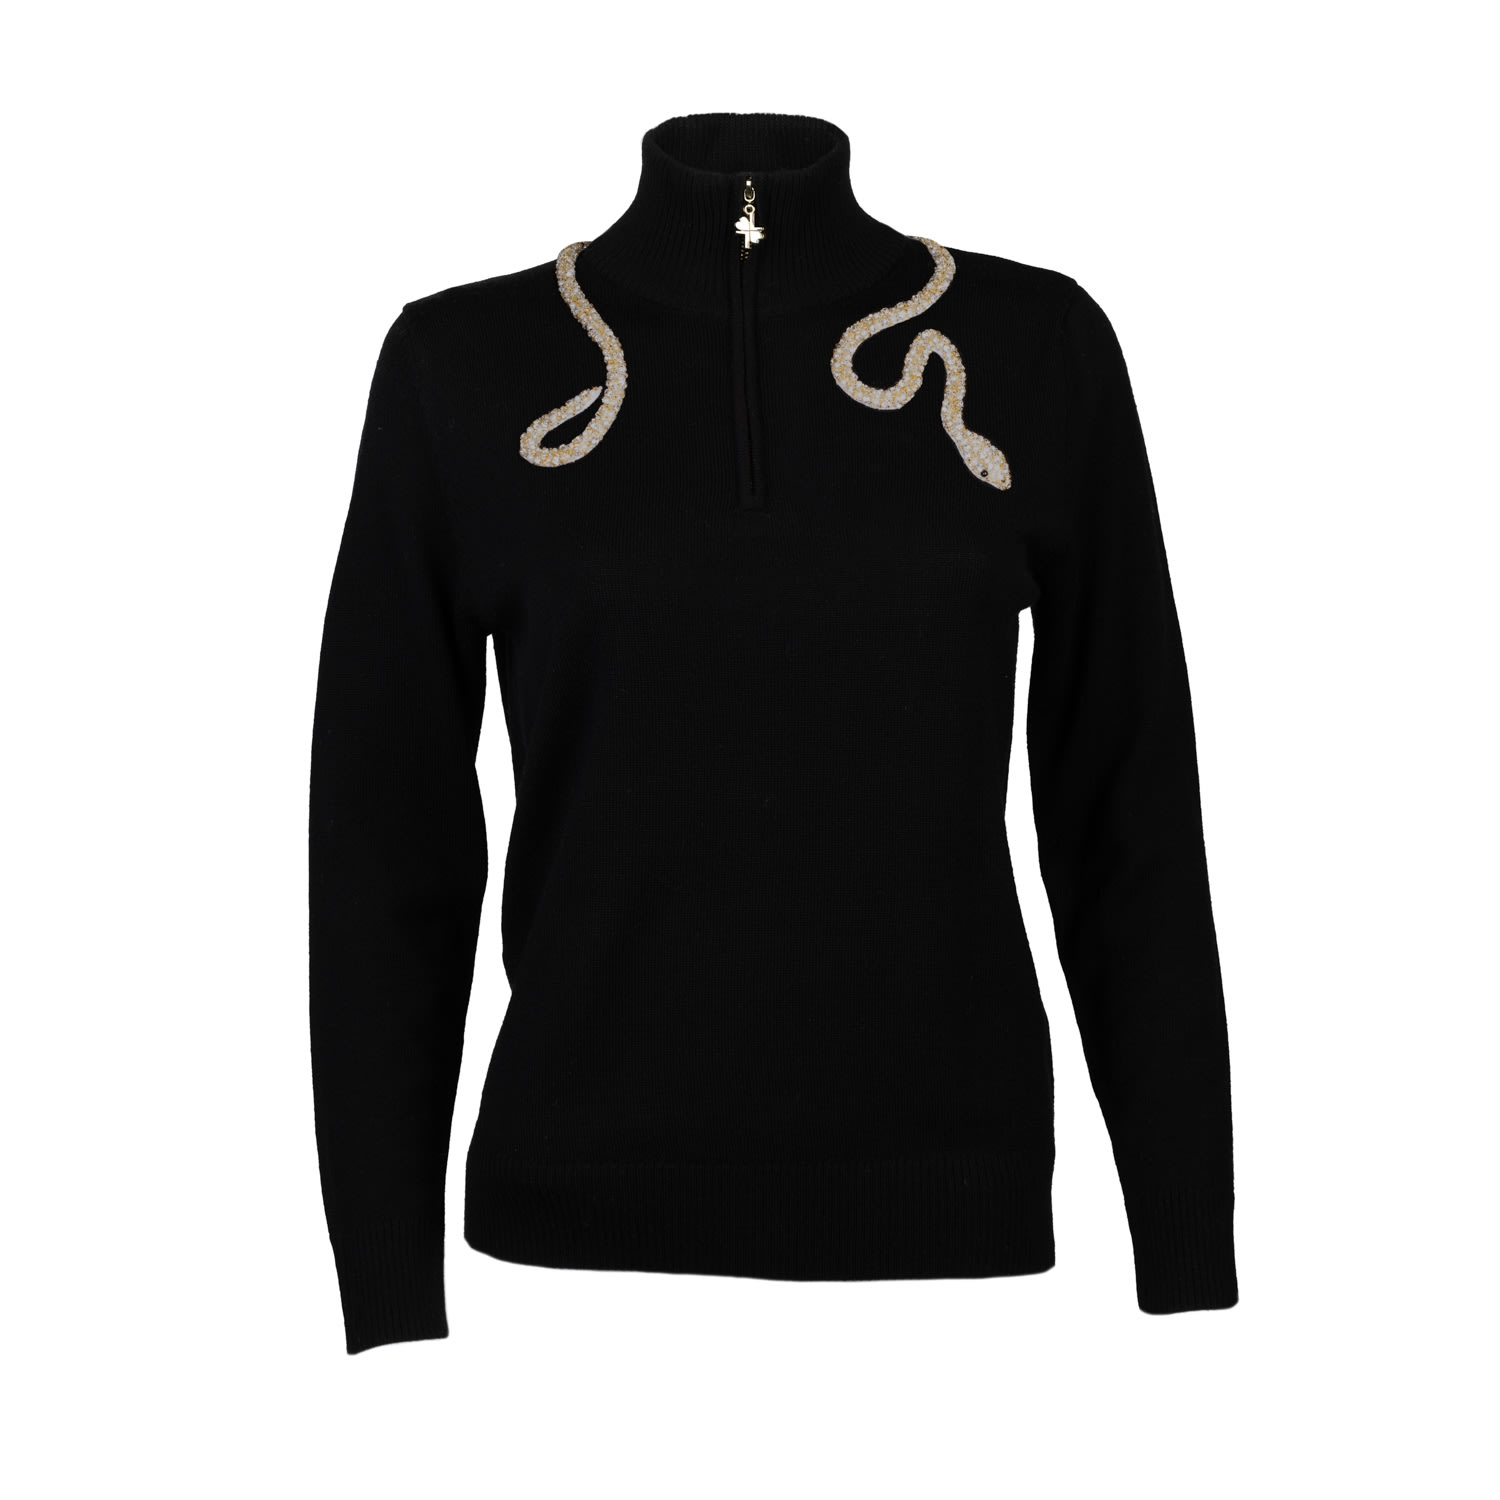 Laines London Women's Laines Couture Black Quarter Zip Jumper With Embellished Crystal & Pearl Snake